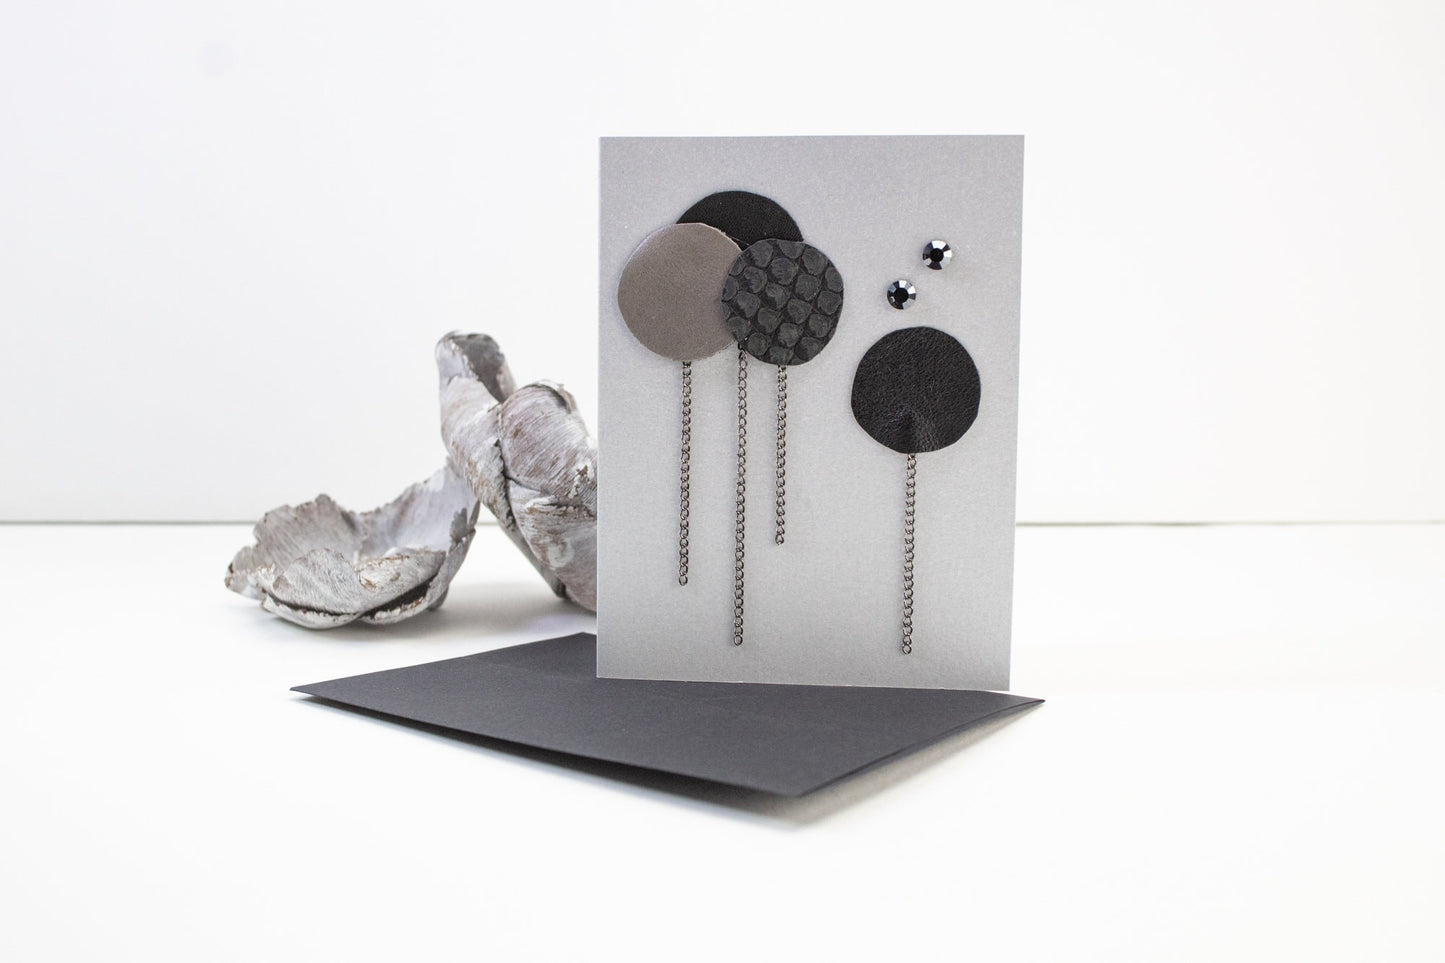 Black and Gray Circle Balloons with Chains Crystals Blank Card